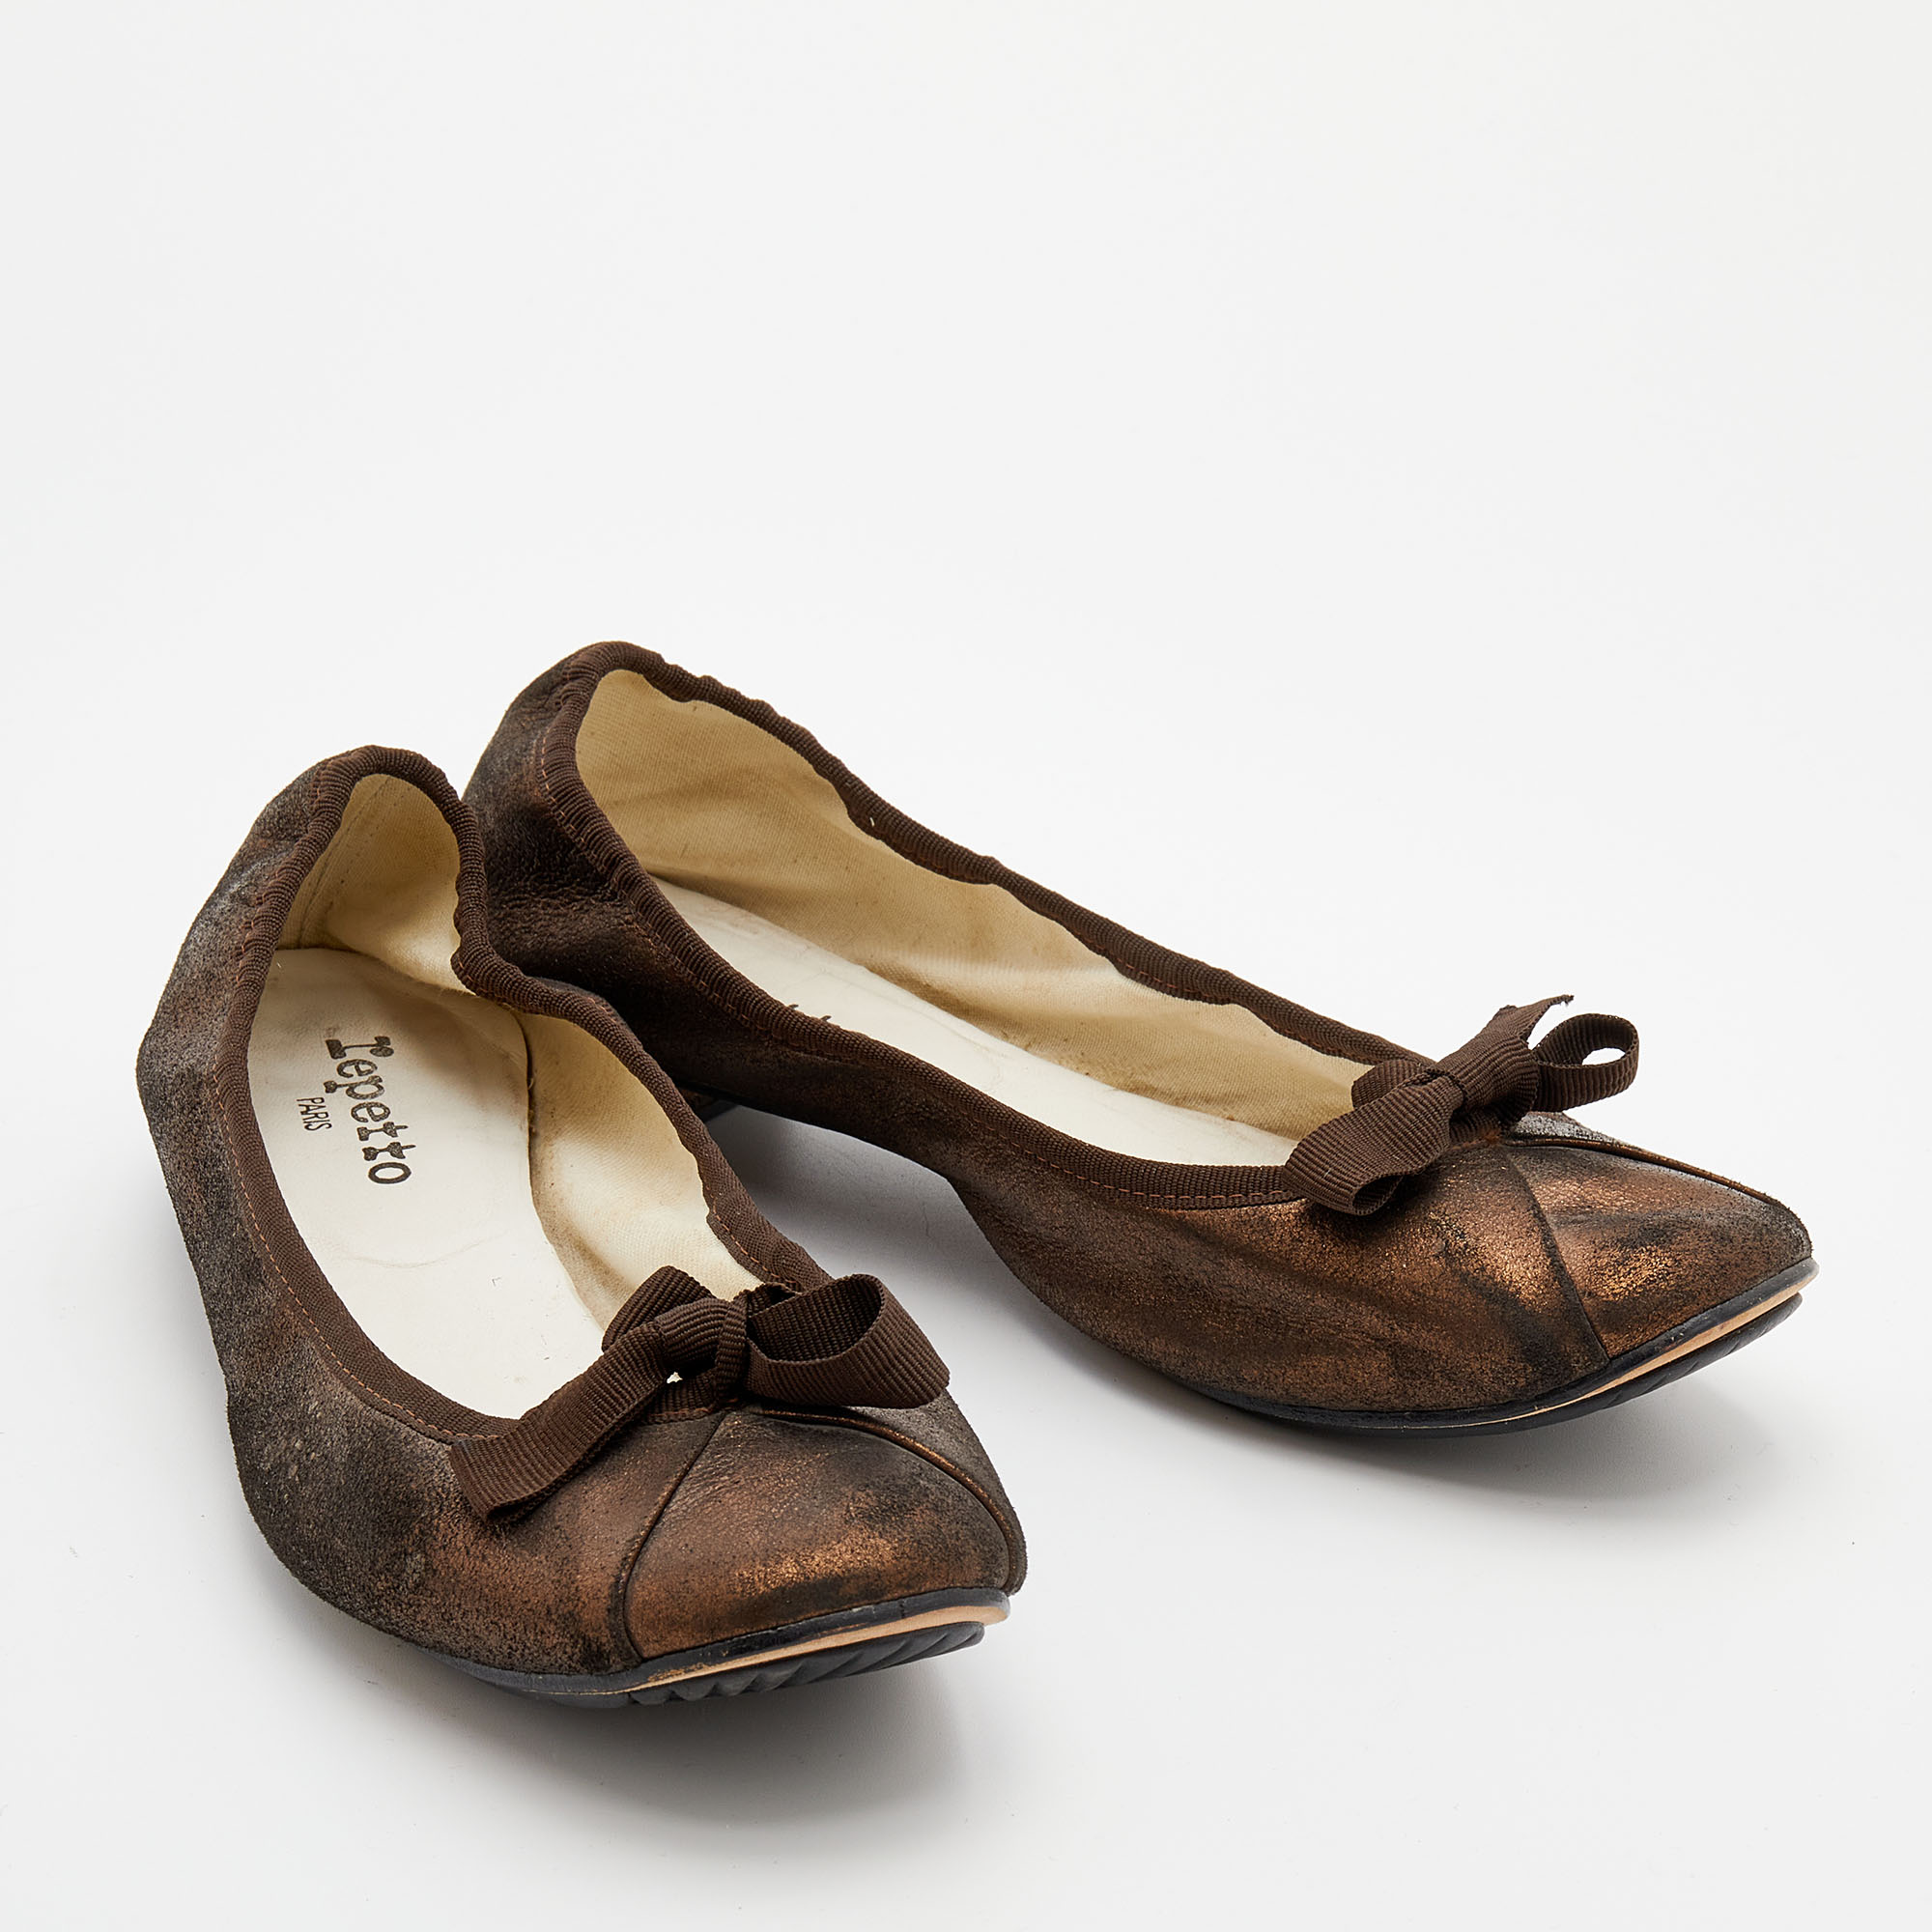 Repetto Metallic Bronze Suede Bow Ballet Flats Size 41